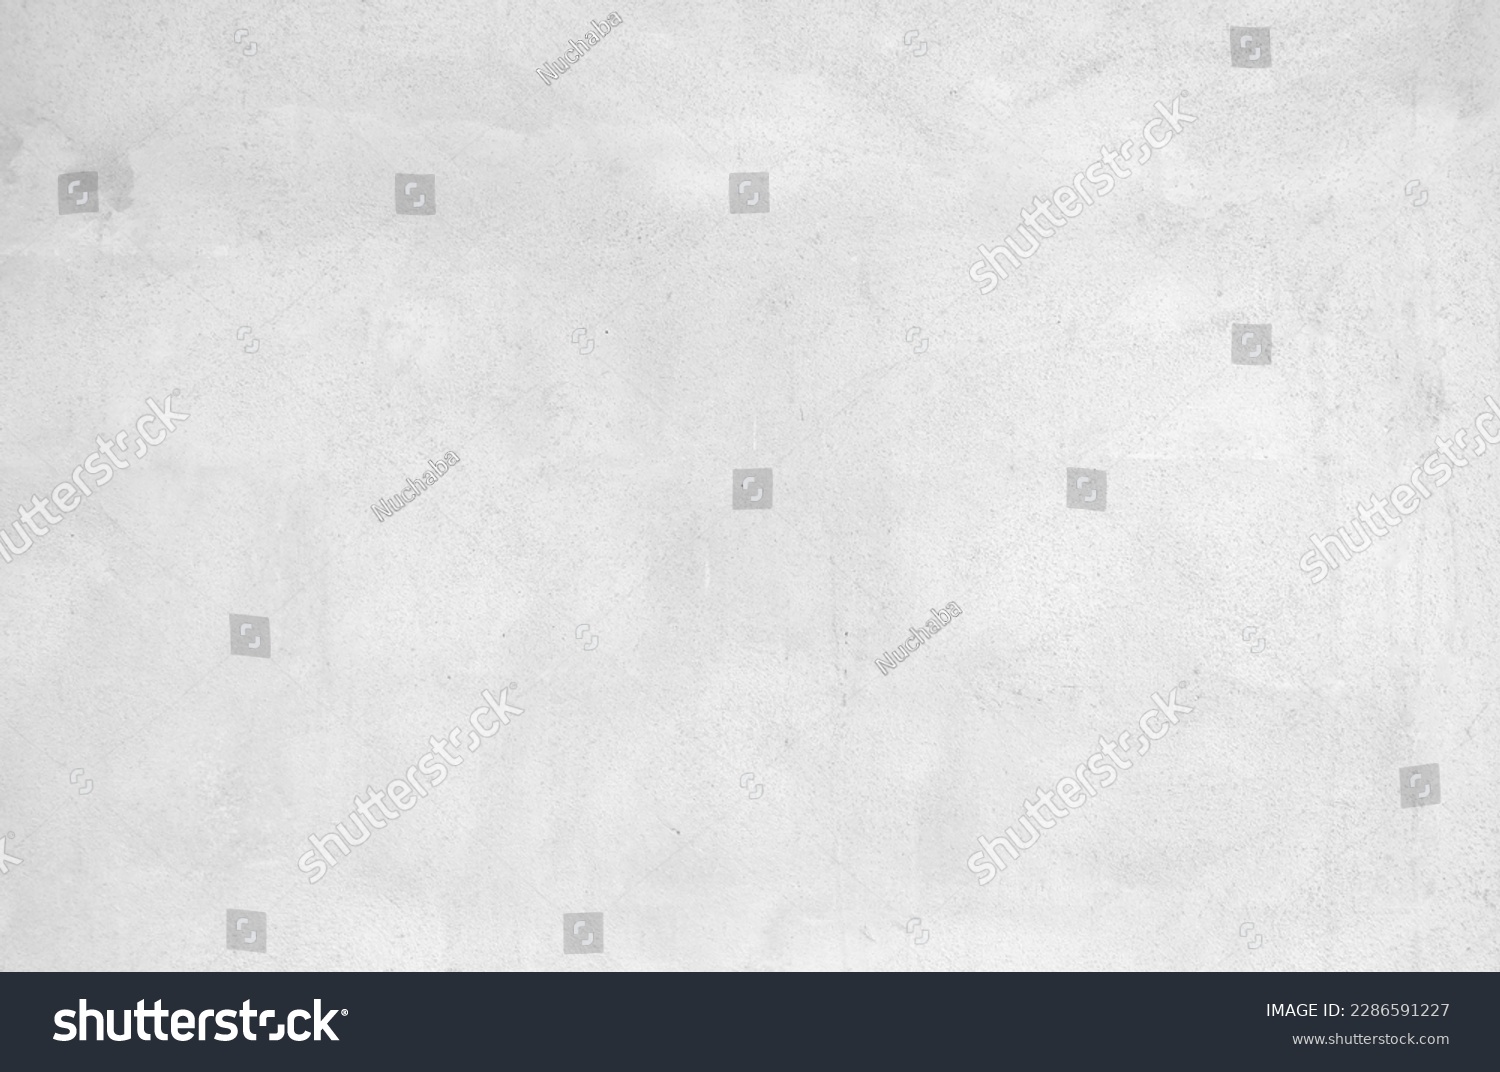 White cement wall in retro concept. Old concrete background for wallpaper or graphic design. Blank plaster texture in vintage style. Modern house interiors that feel calm and simple. #2286591227